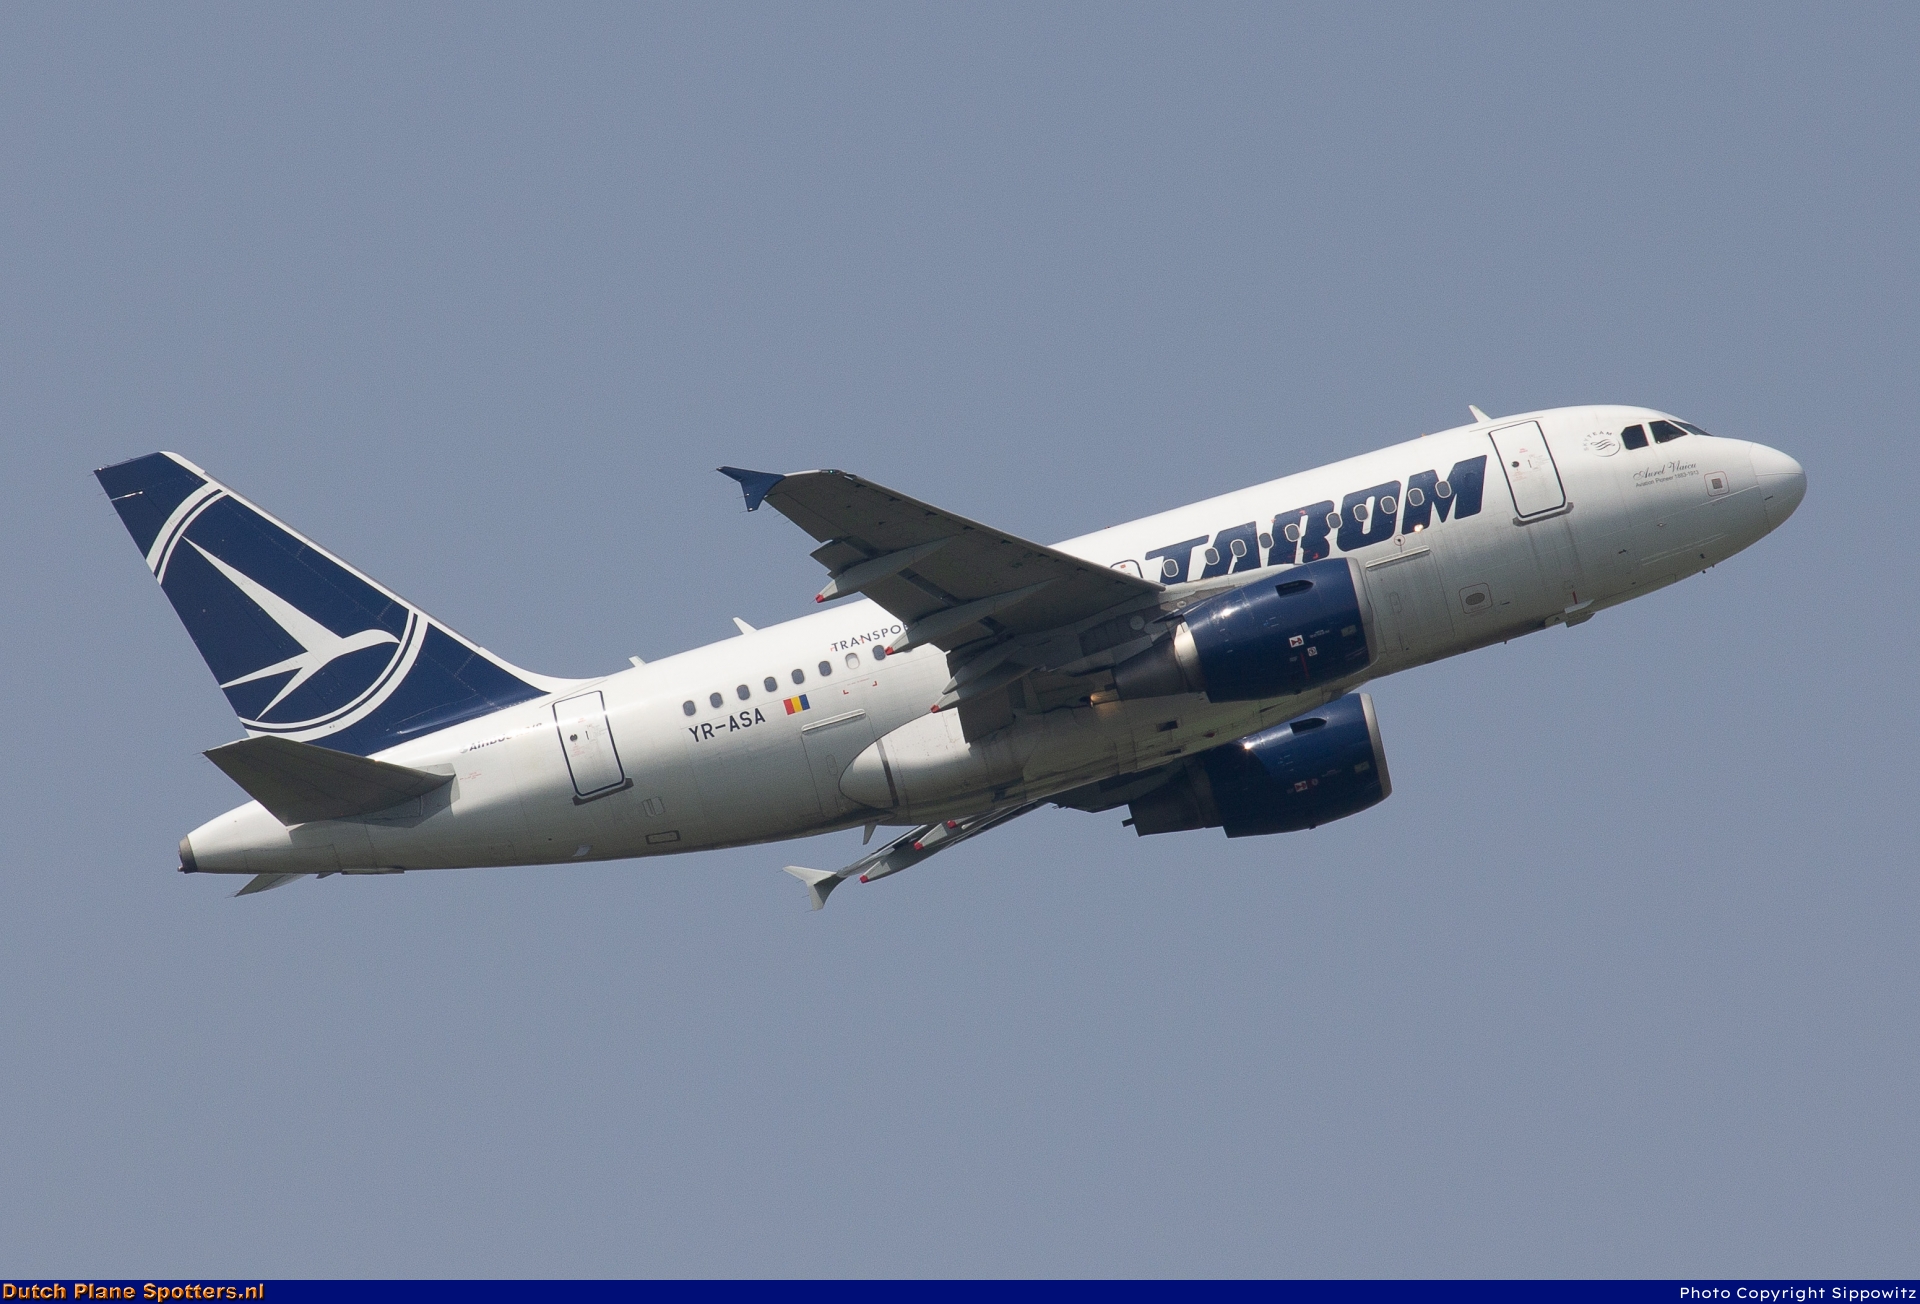 YR-ASA Airbus A318 TAROM by Sippowitz